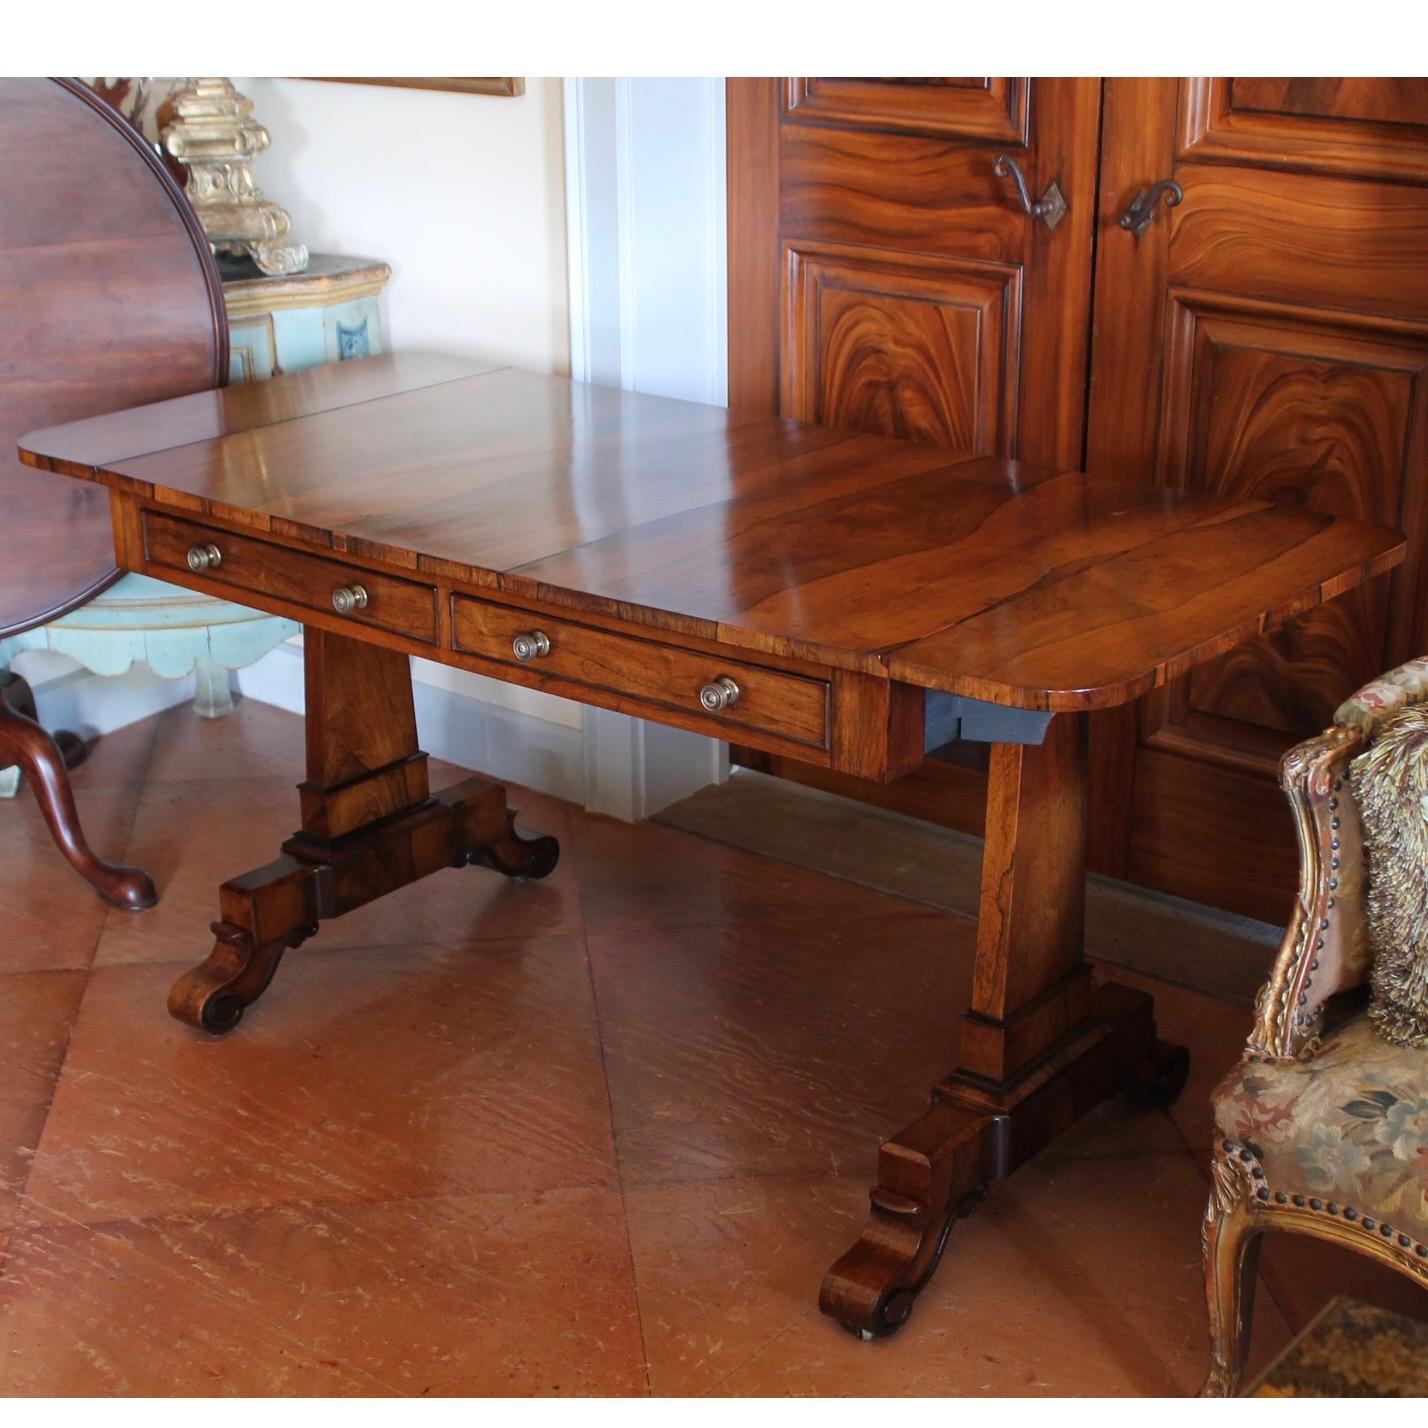 A striking and elegantly contoured sofa table resting on slender obelisk form pedestal legs supported by carved scroll feet on casters. Two functional drawers on one side and with false drawer fronts on the reverse. There are two narrow drop leaves